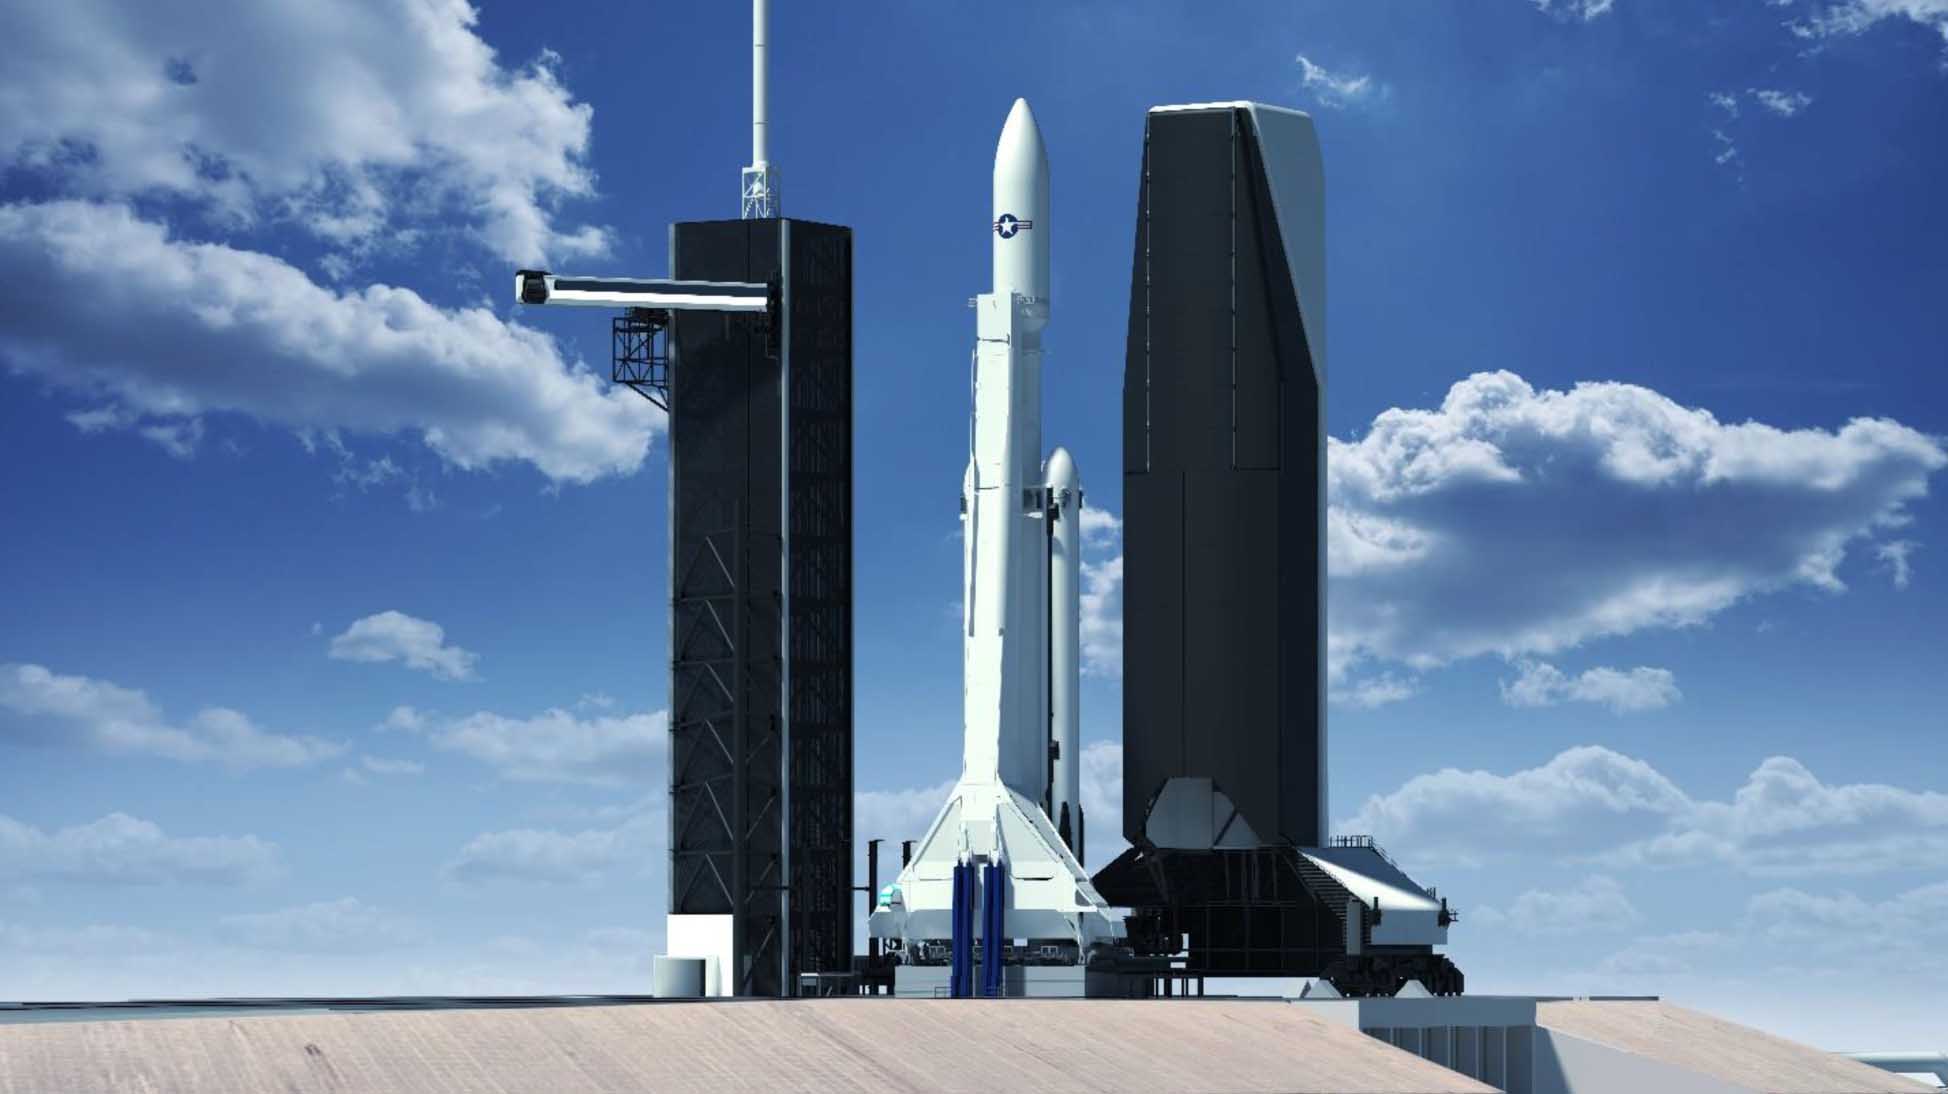 SpaceX aims to launch 70 missions a year from Florida's Space Coast by